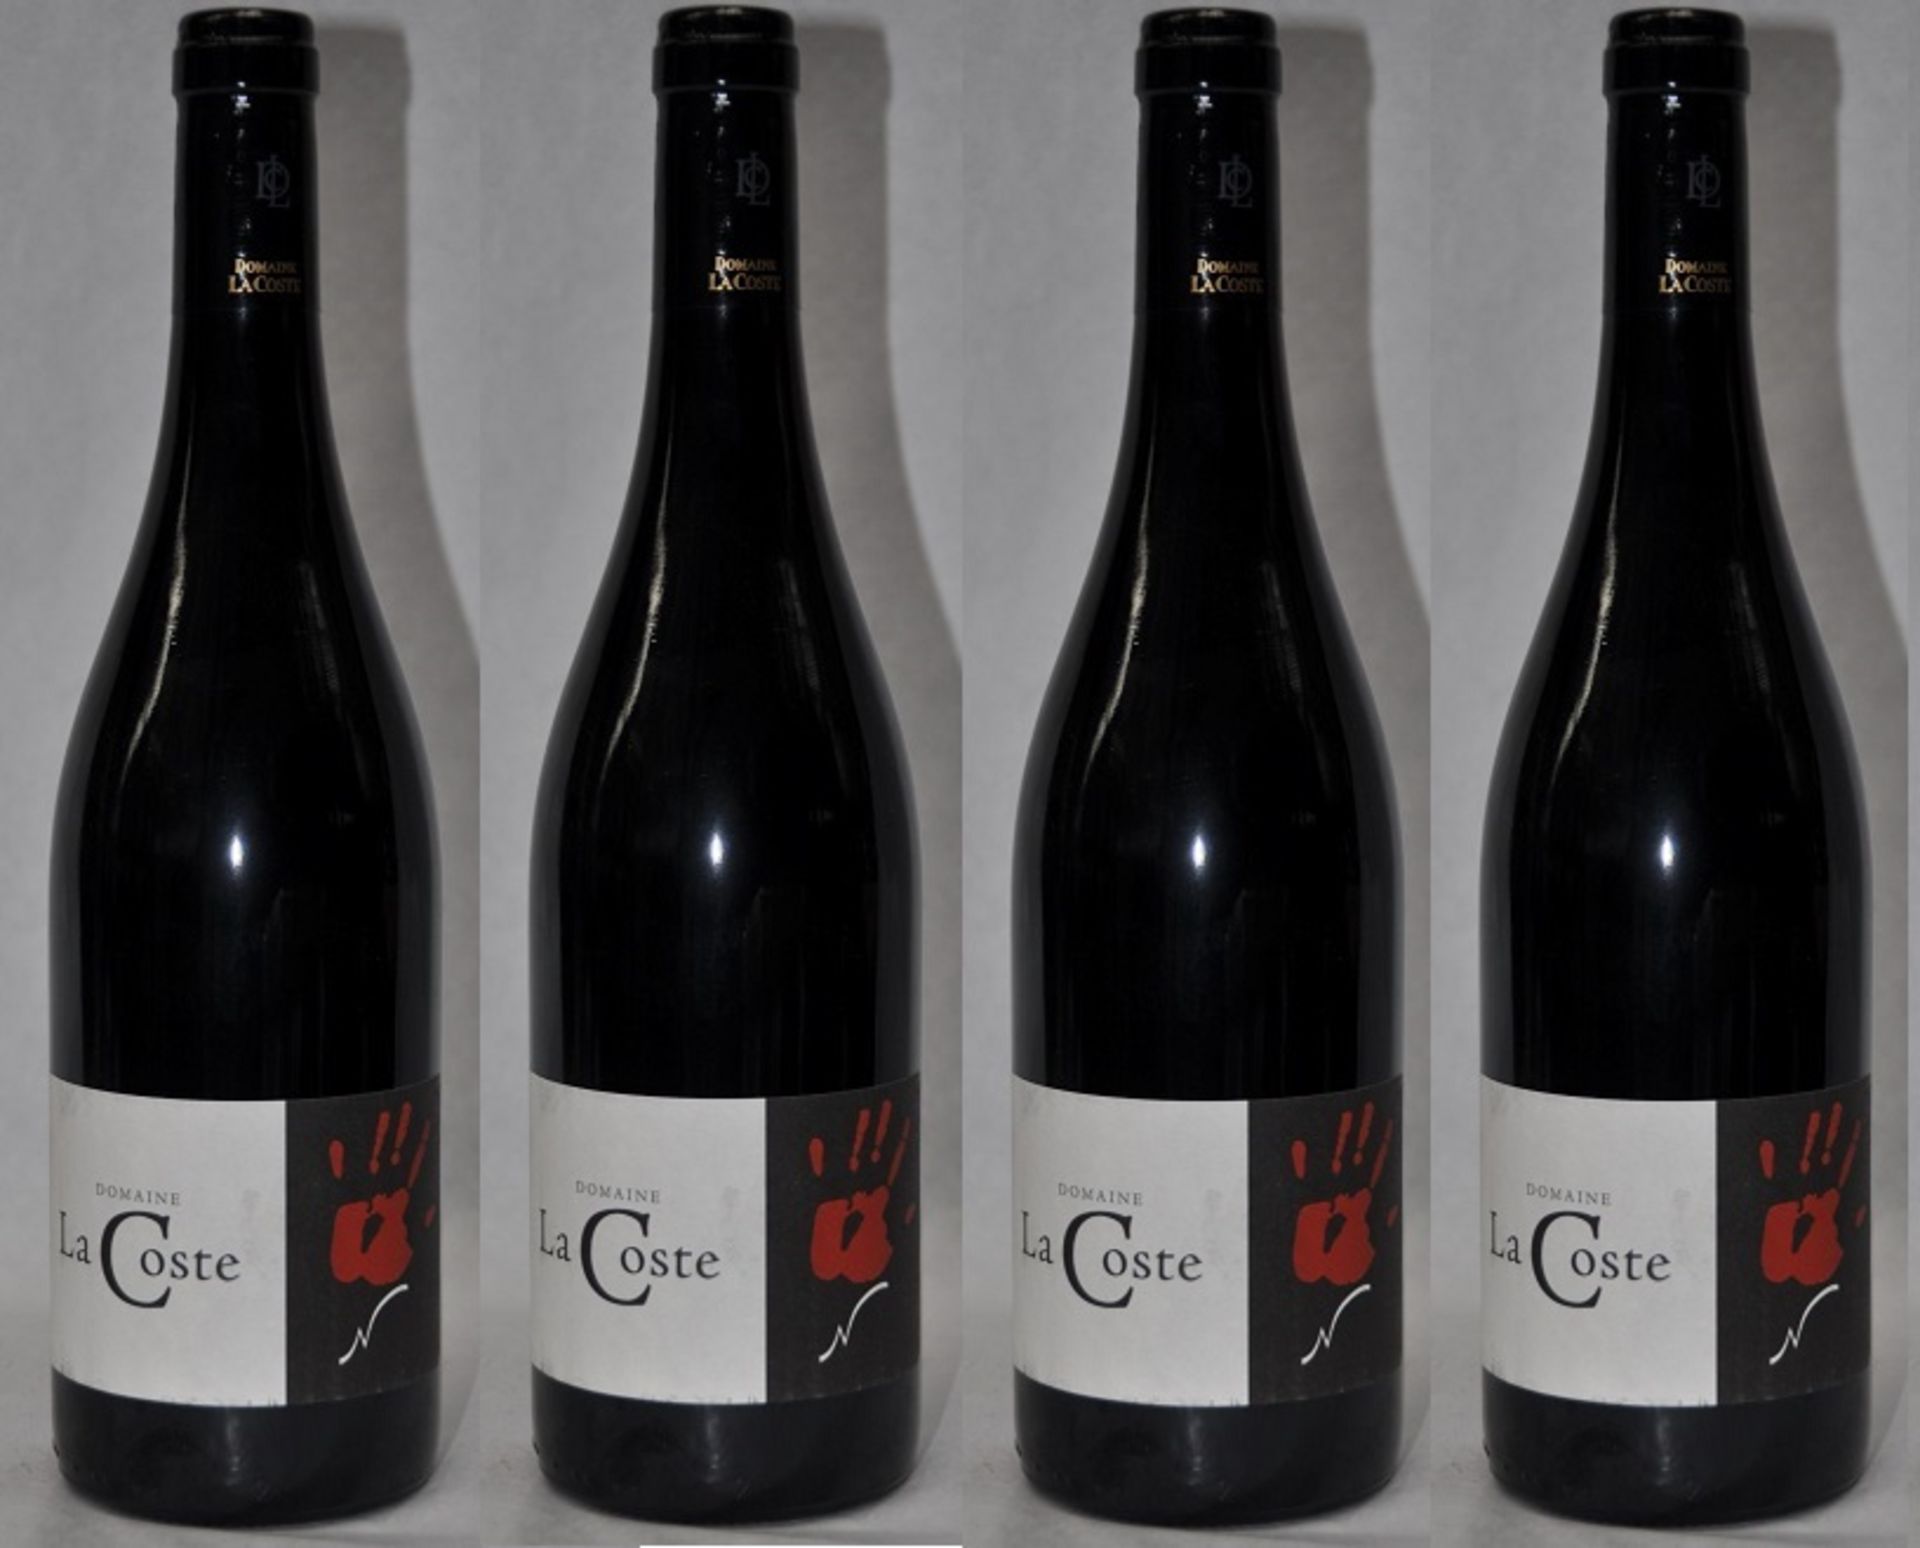 4 x Domaine La Coste Red Wines - French Wine - Year 2007 - Bottle Size 75cl - Volume 13.8% - Ref